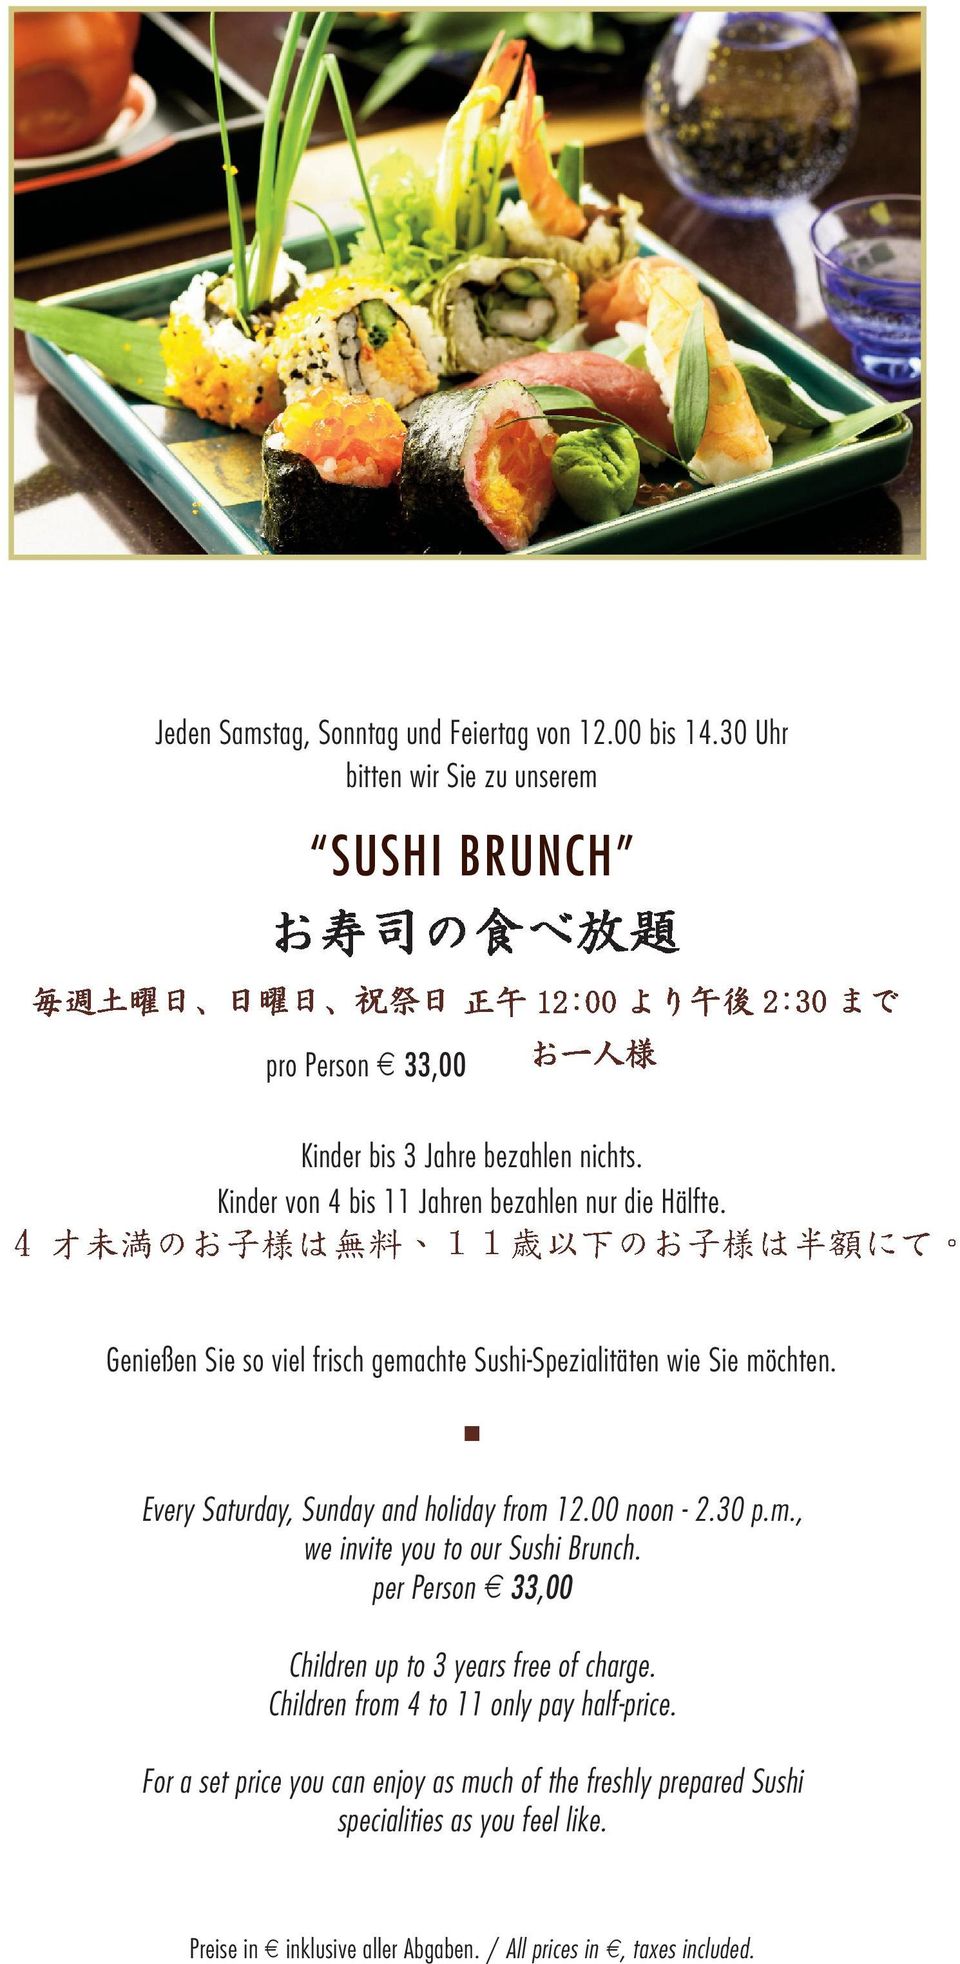 Every Saturday, Sunday and holiday from 12.00 noon - 2.30 p.m., we invite you to our Sushi Brunch. per Person e 33,00 Children up to 3 years free of charge.